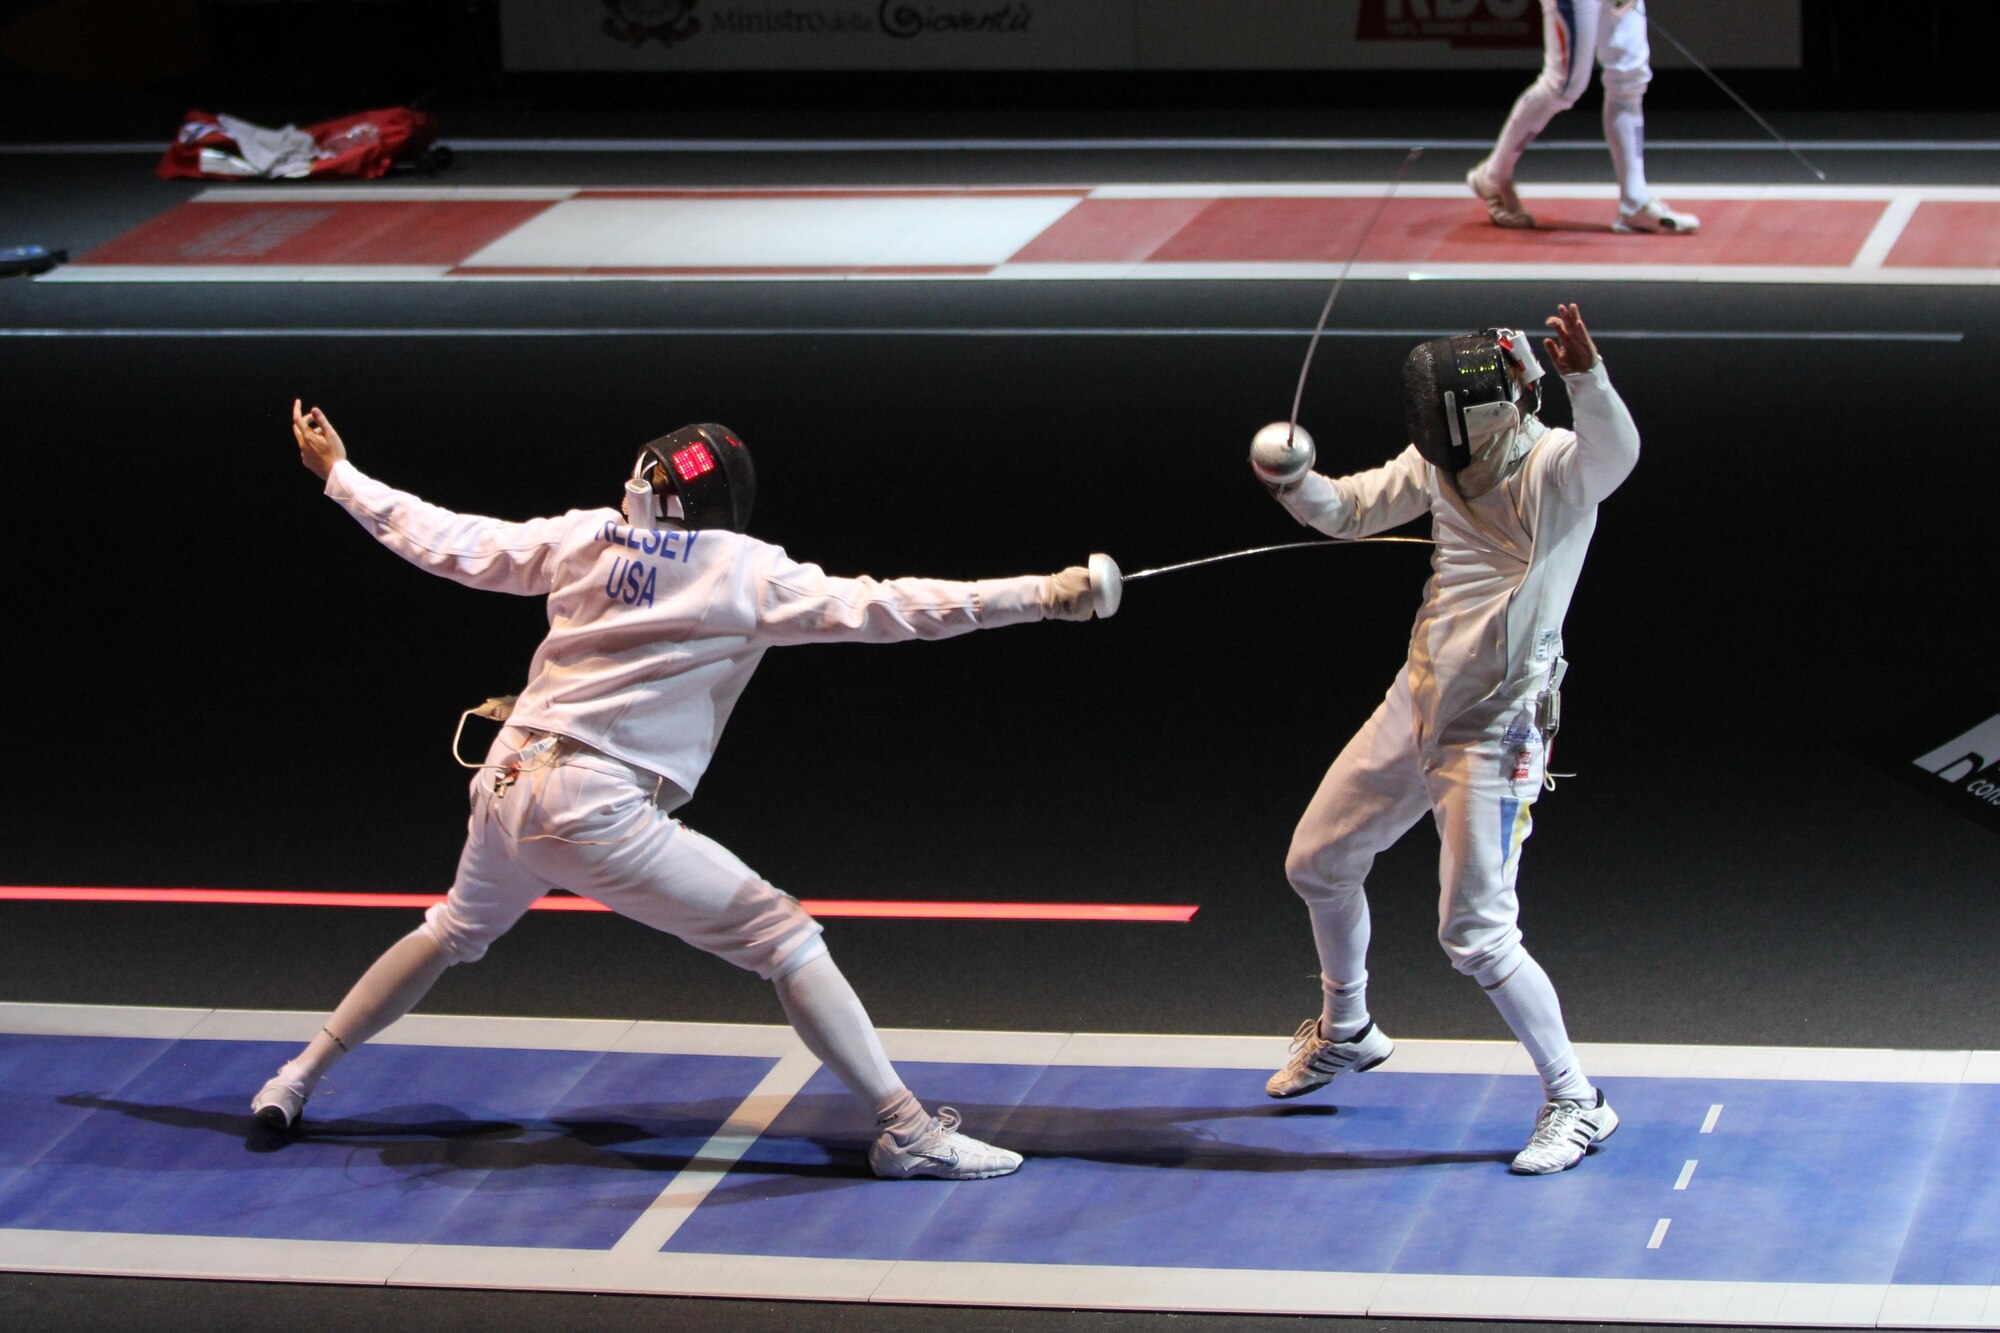 Capt. Weston S. Kelsey, force support officer, 310th Mission Support Squadron at Buckley Air Force Base, Colo., scores the final point in a recent Epee fencing match. Kelsey was named Air Force 2011 Male Athlete of the Year and was also named to the U.S. Olympic team for the 2012 Summer Olympics in London (Courtesy photo)